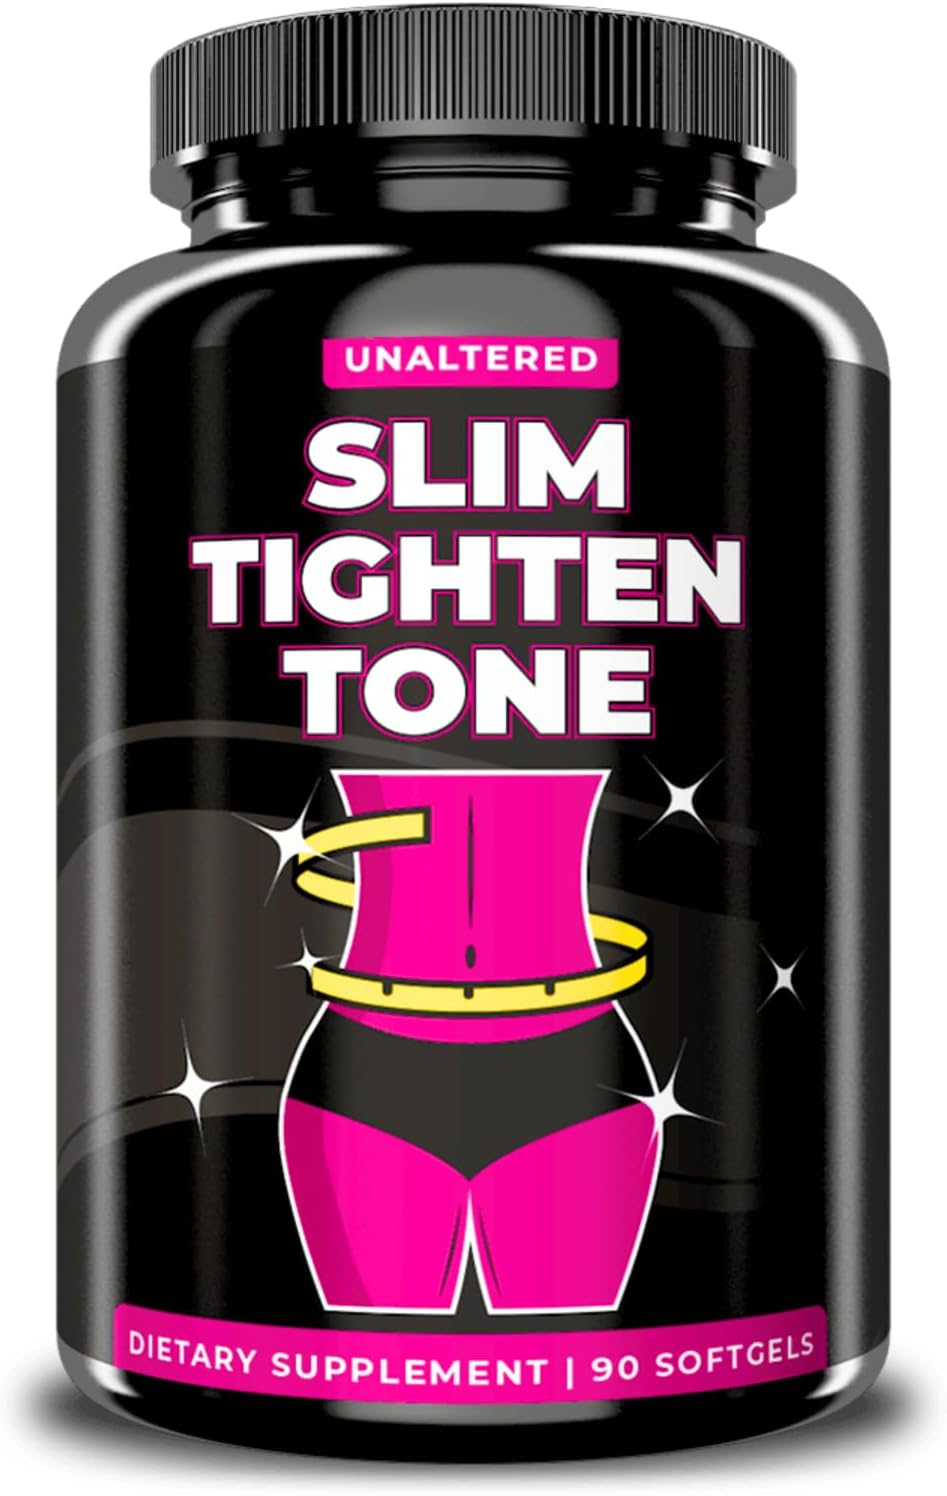 UNALTERED Weight Loss Pills for Women Belly Fat - Lose Stomach Fat, Reduce Bloating, Avoid Hormonal Weight Gain - Natural Fat Burner  Diet Pills to Slim Tighten Tone - 90 Capsules